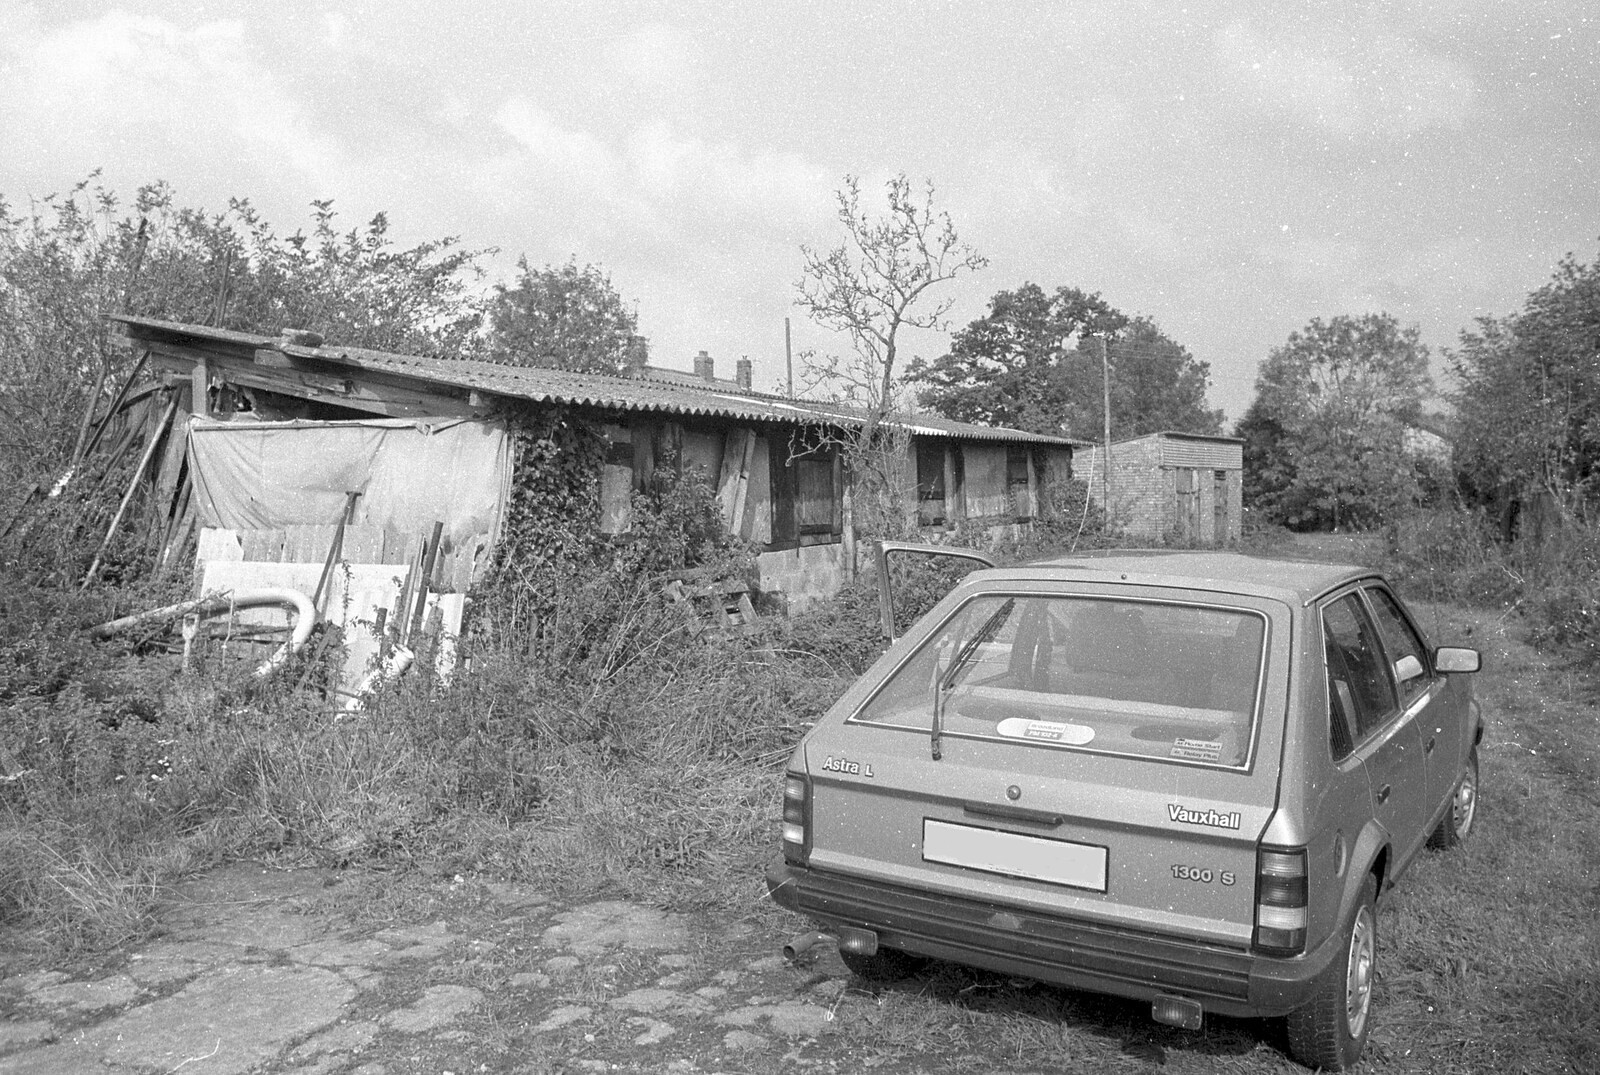 Vehicle A is ready to blast the Alpine stereo from Cider Making in Black and White, Stuston, Suffolk - 11th October 1992